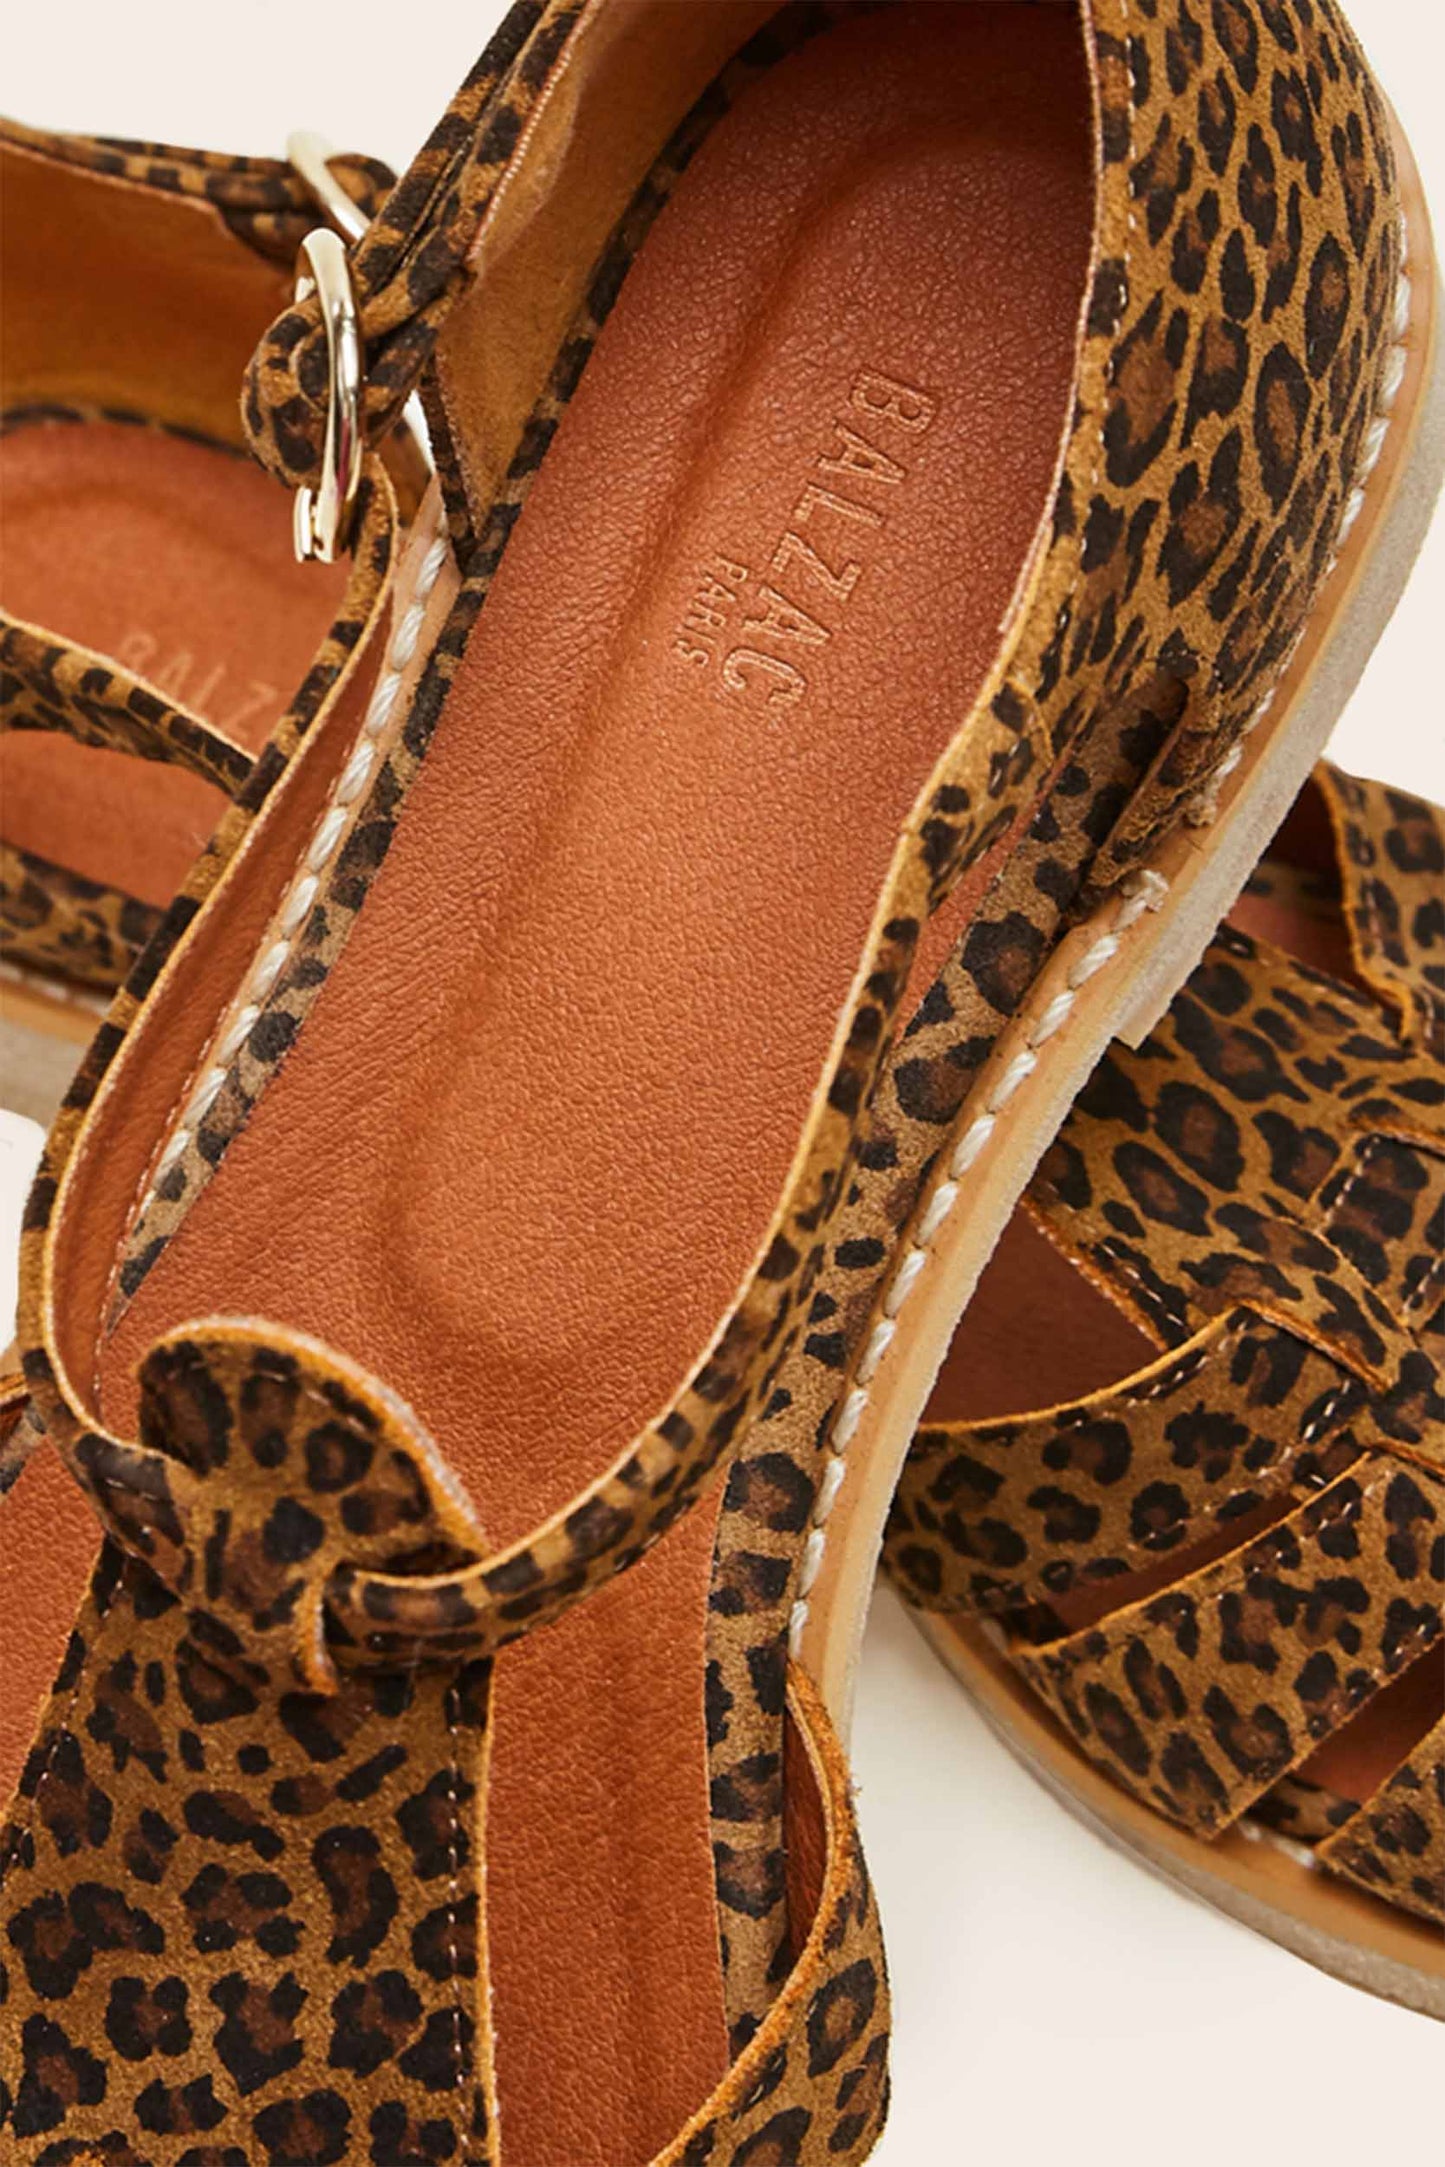 Theoline leopard Mary Janes